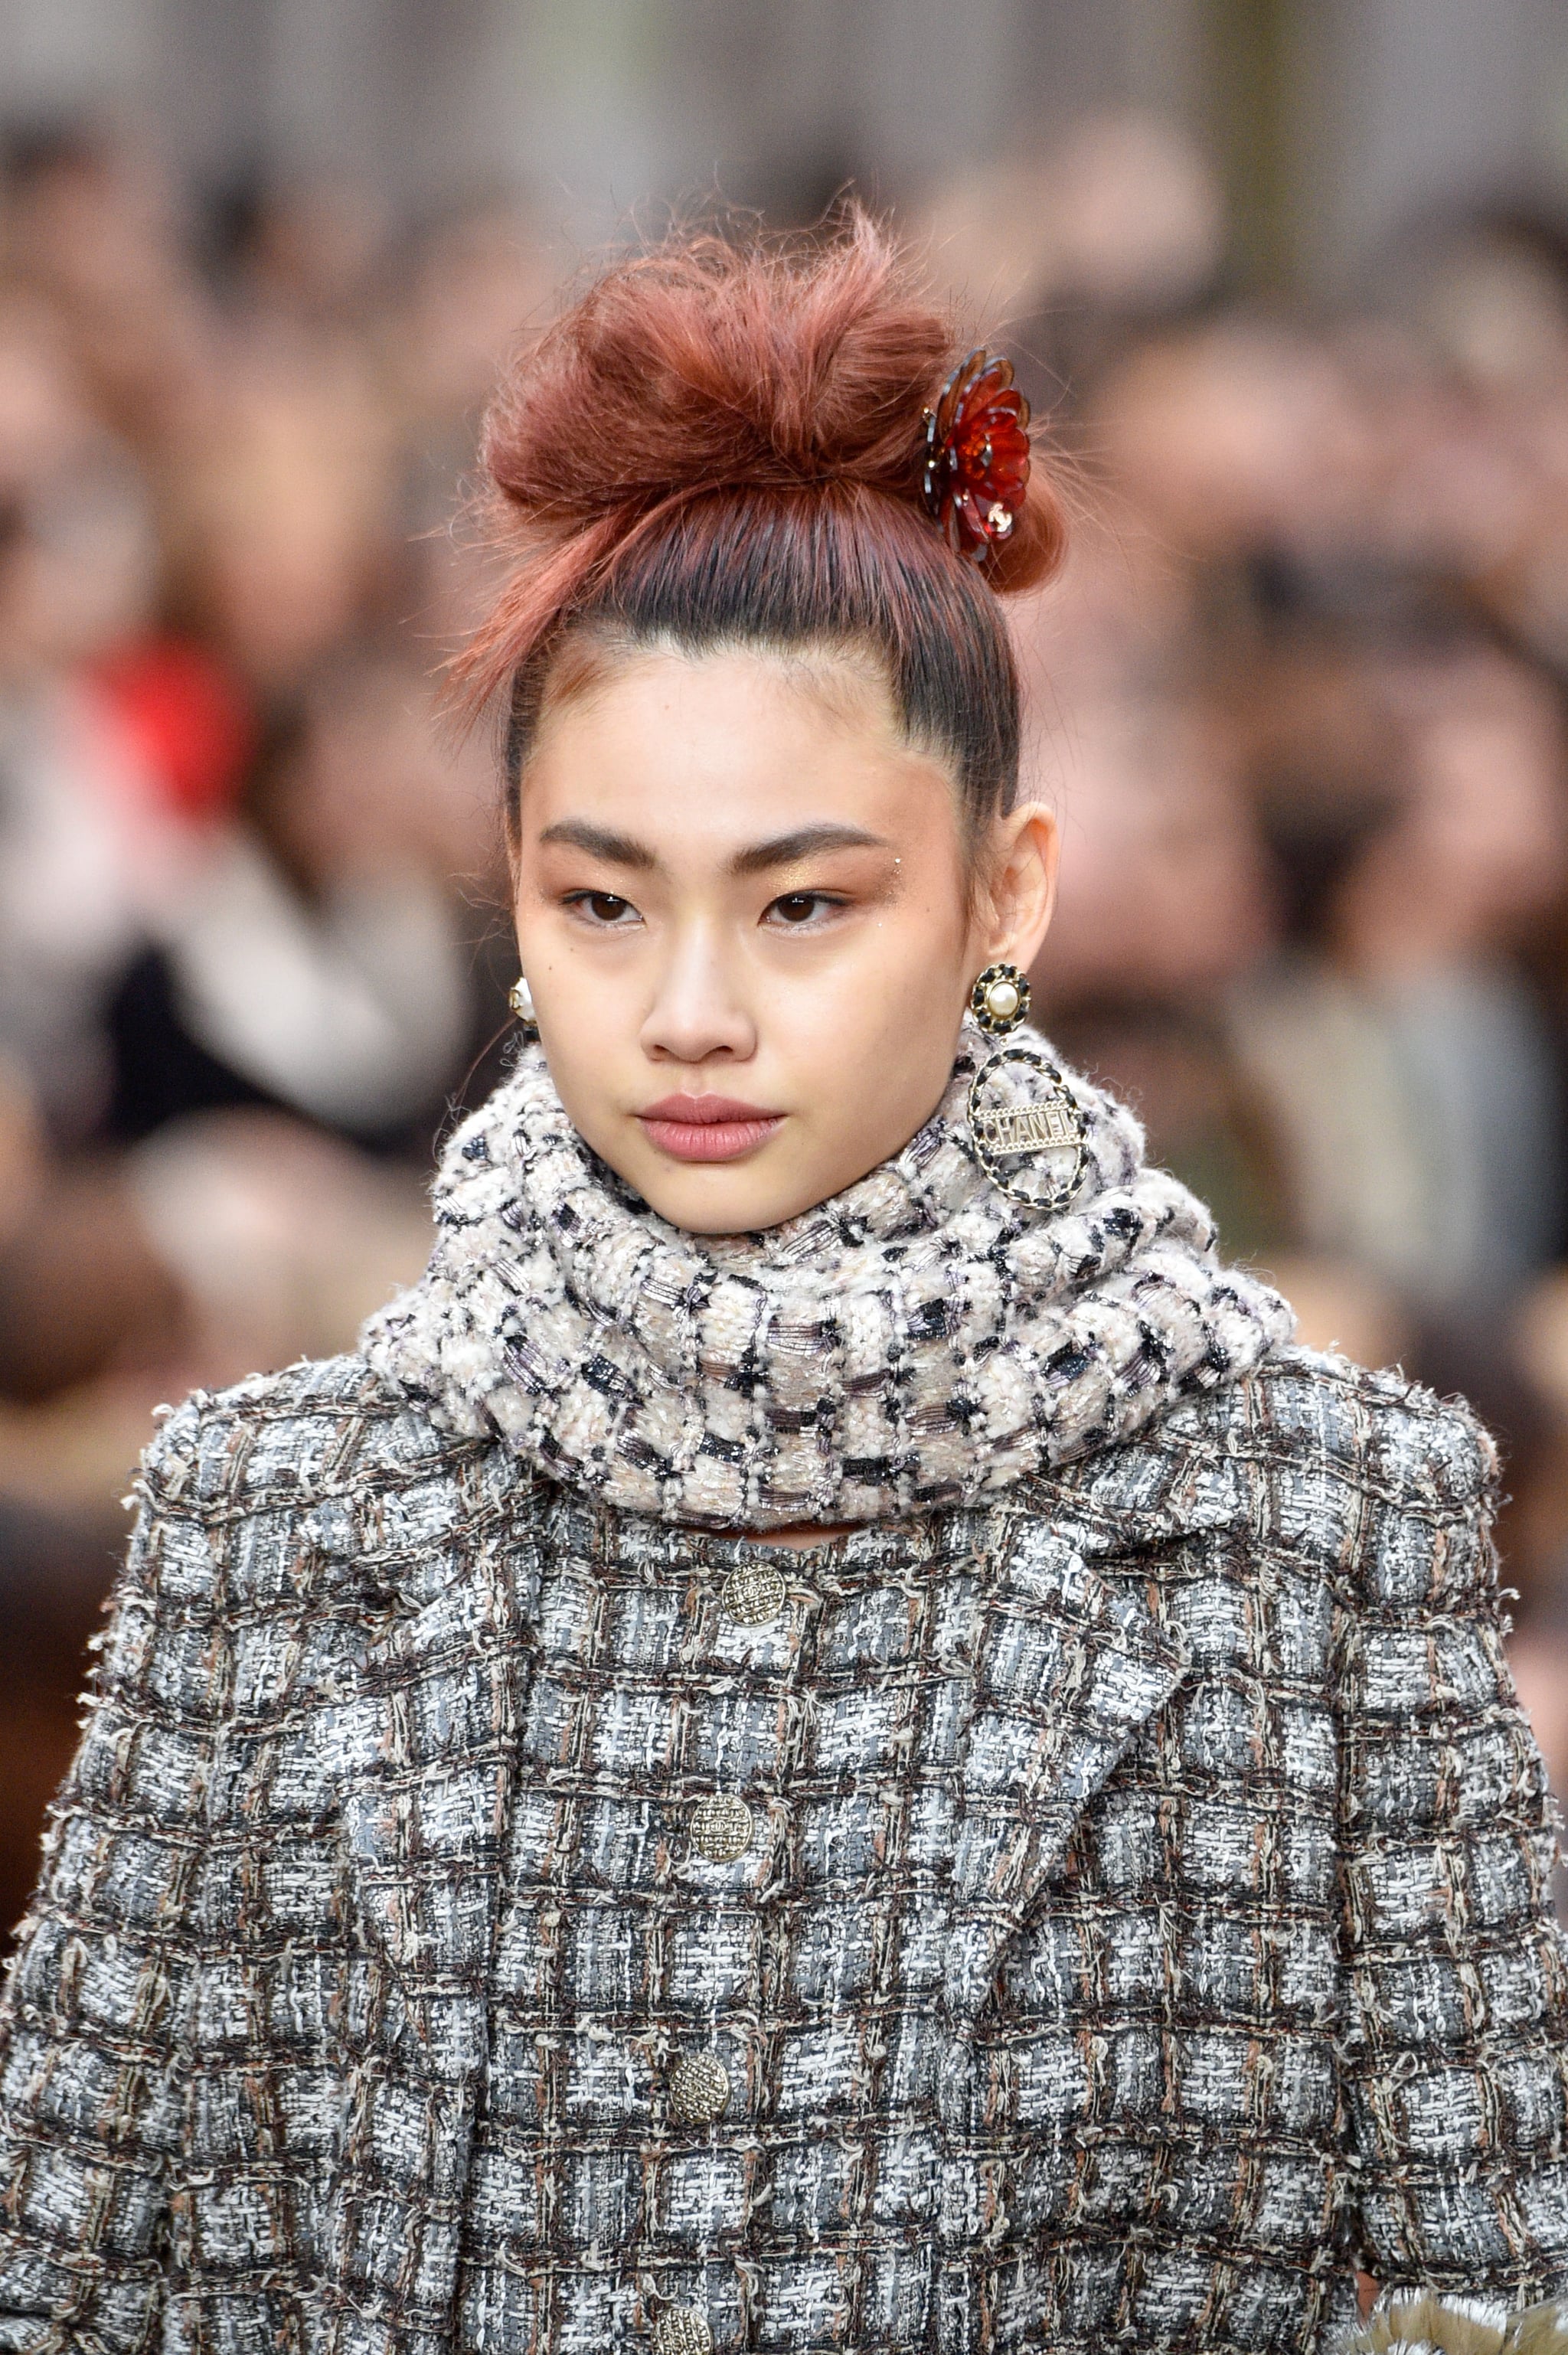 Model Hoyeon Jung walks on the runway during the Chanel Fashion